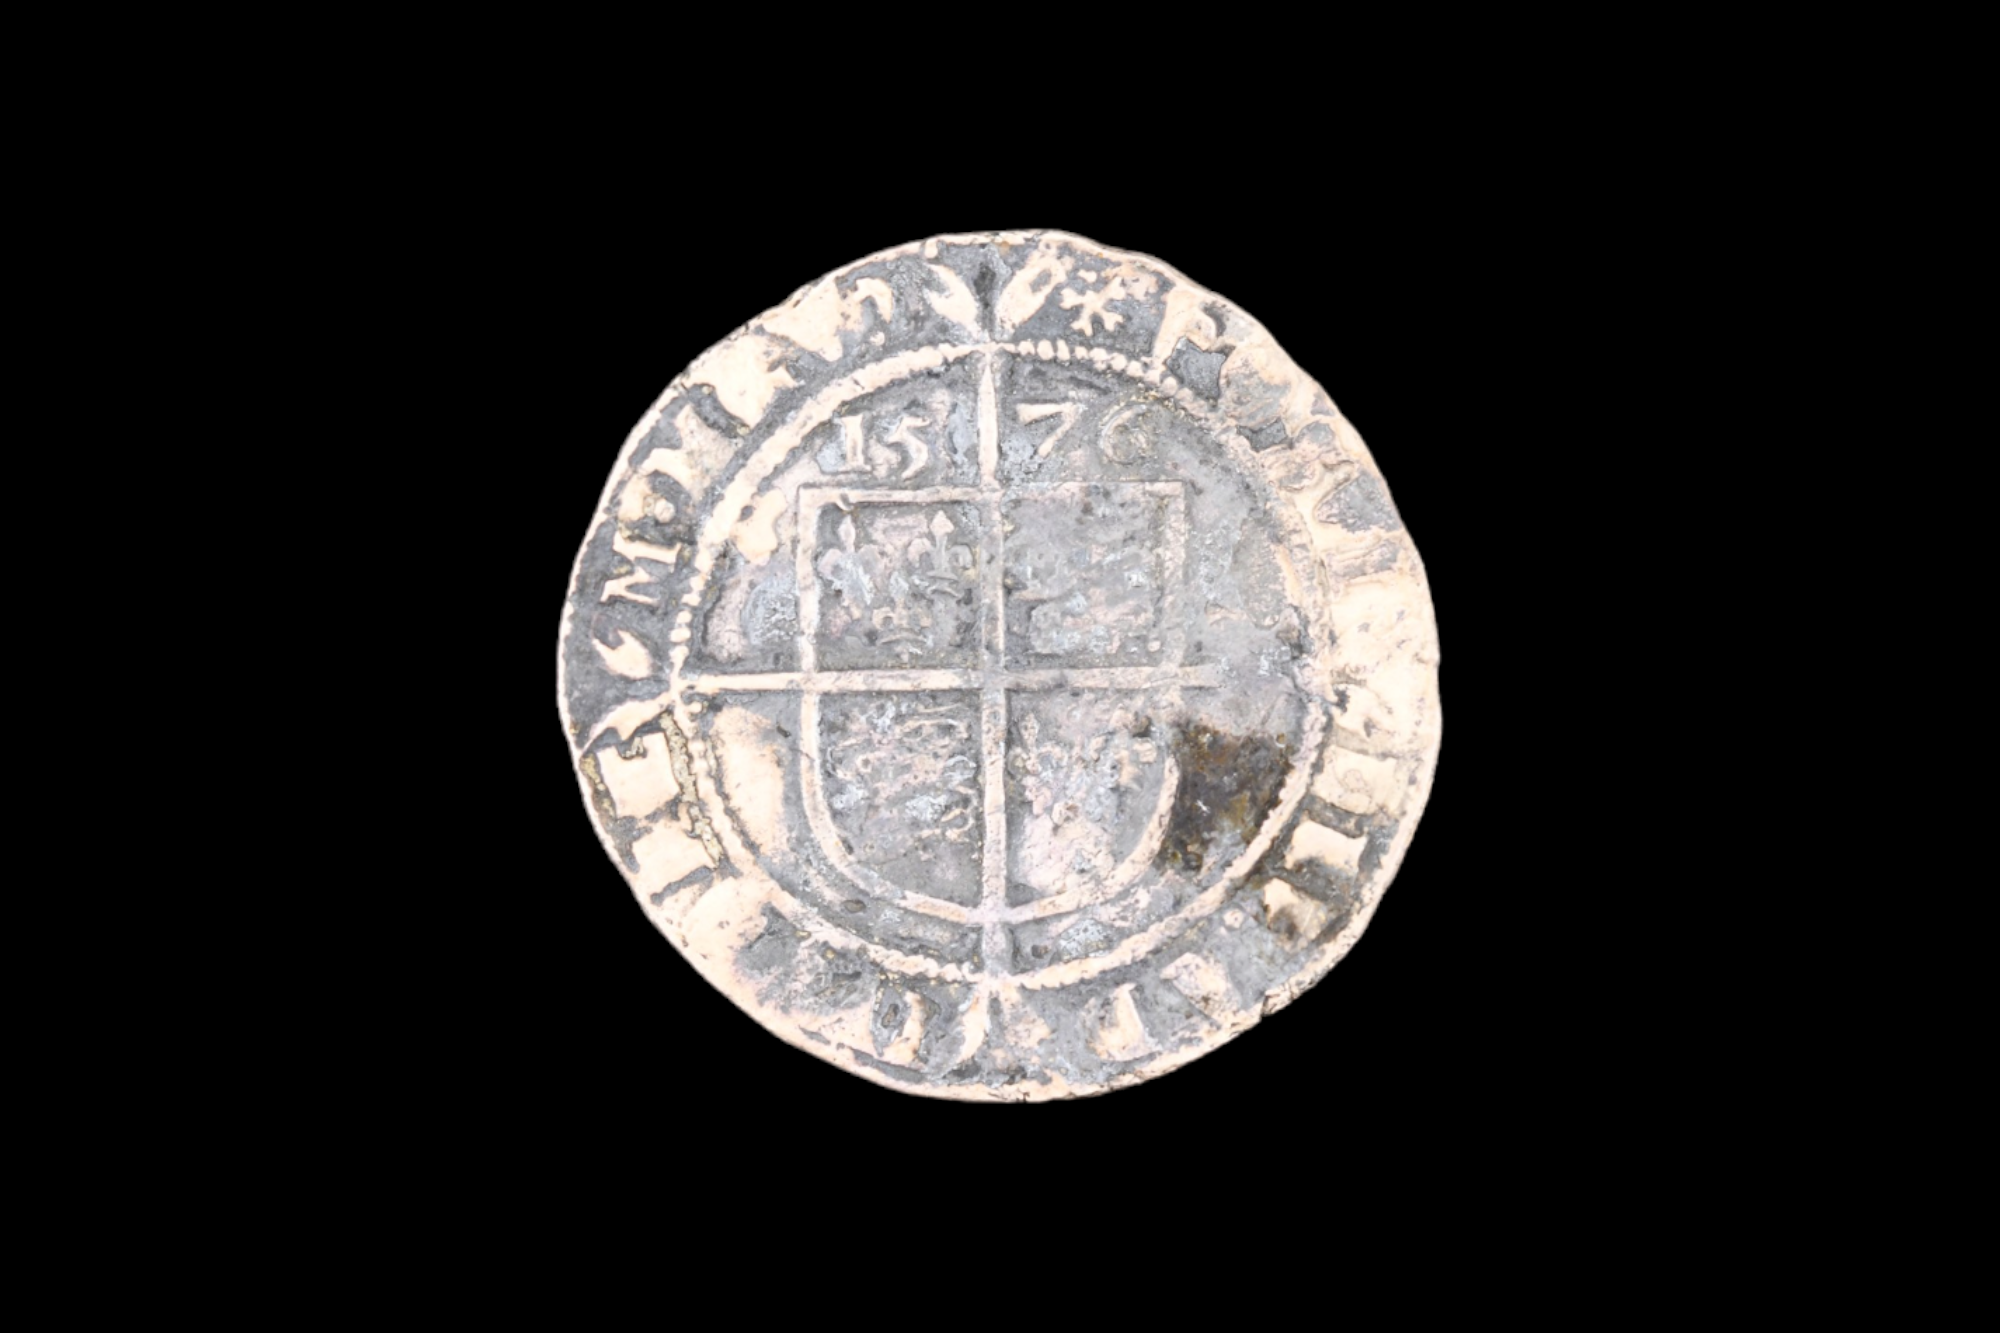 An Elizabeth I 1576 hammered silver sixpence coin